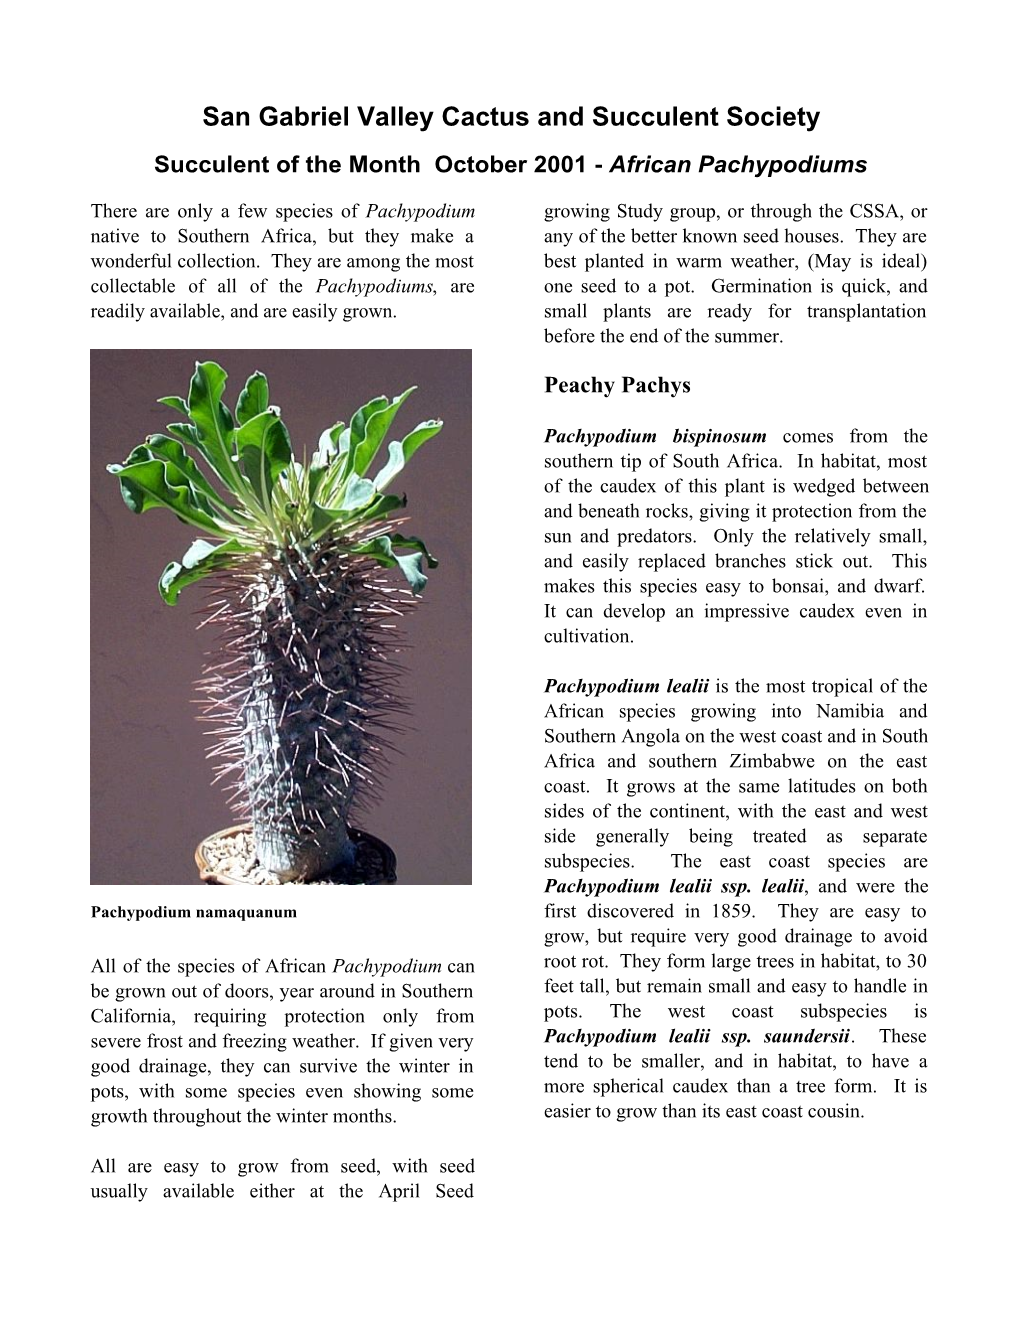 San Gabriel Valley Cactus and Succulent Society Succulent of the Month October 2001 - African Pachypodiums